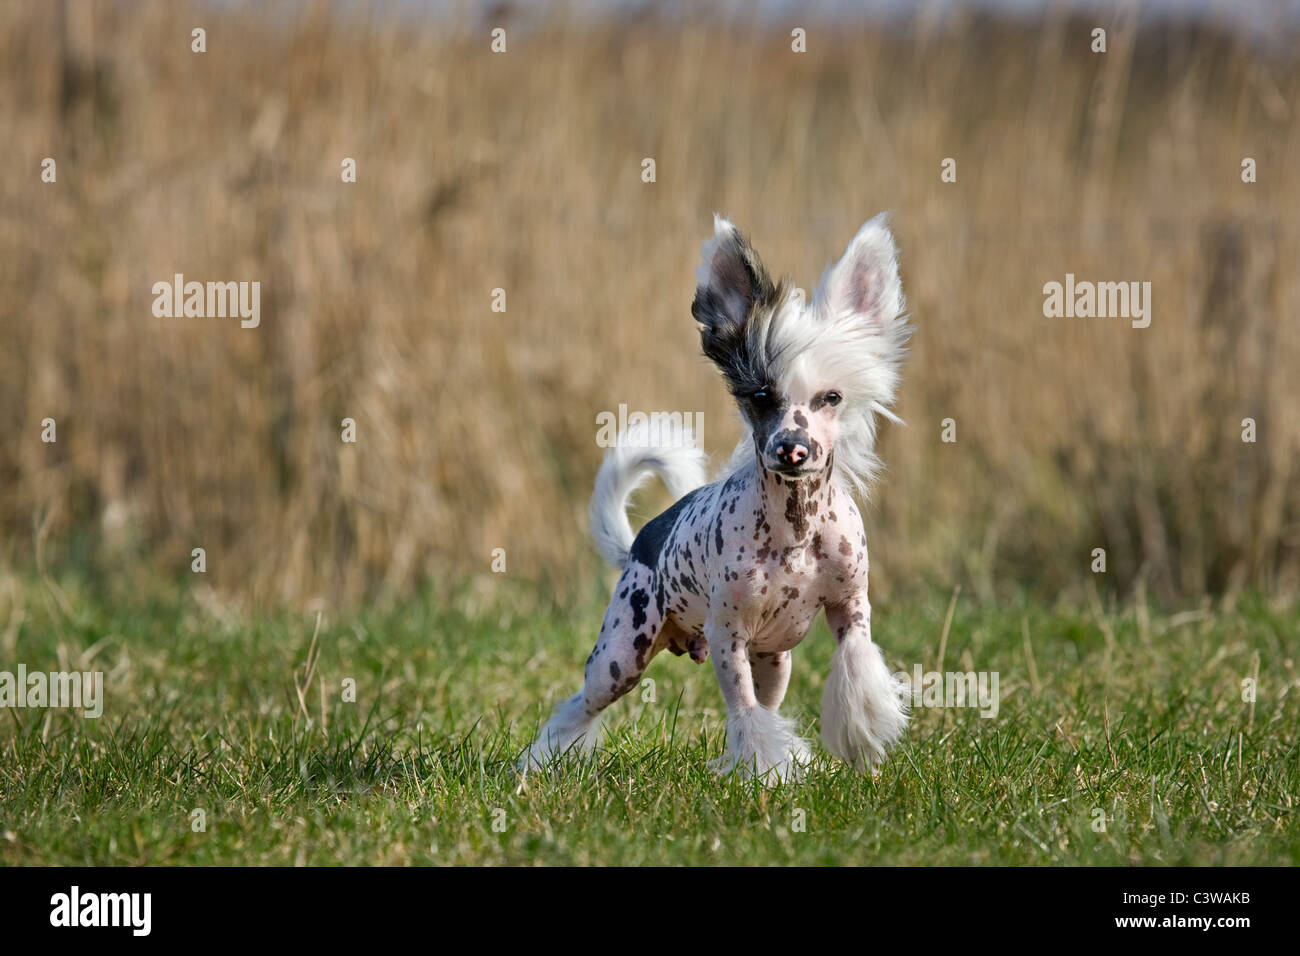 Chinese crested dog (Canis lupus familiaris) in field Stock Photo